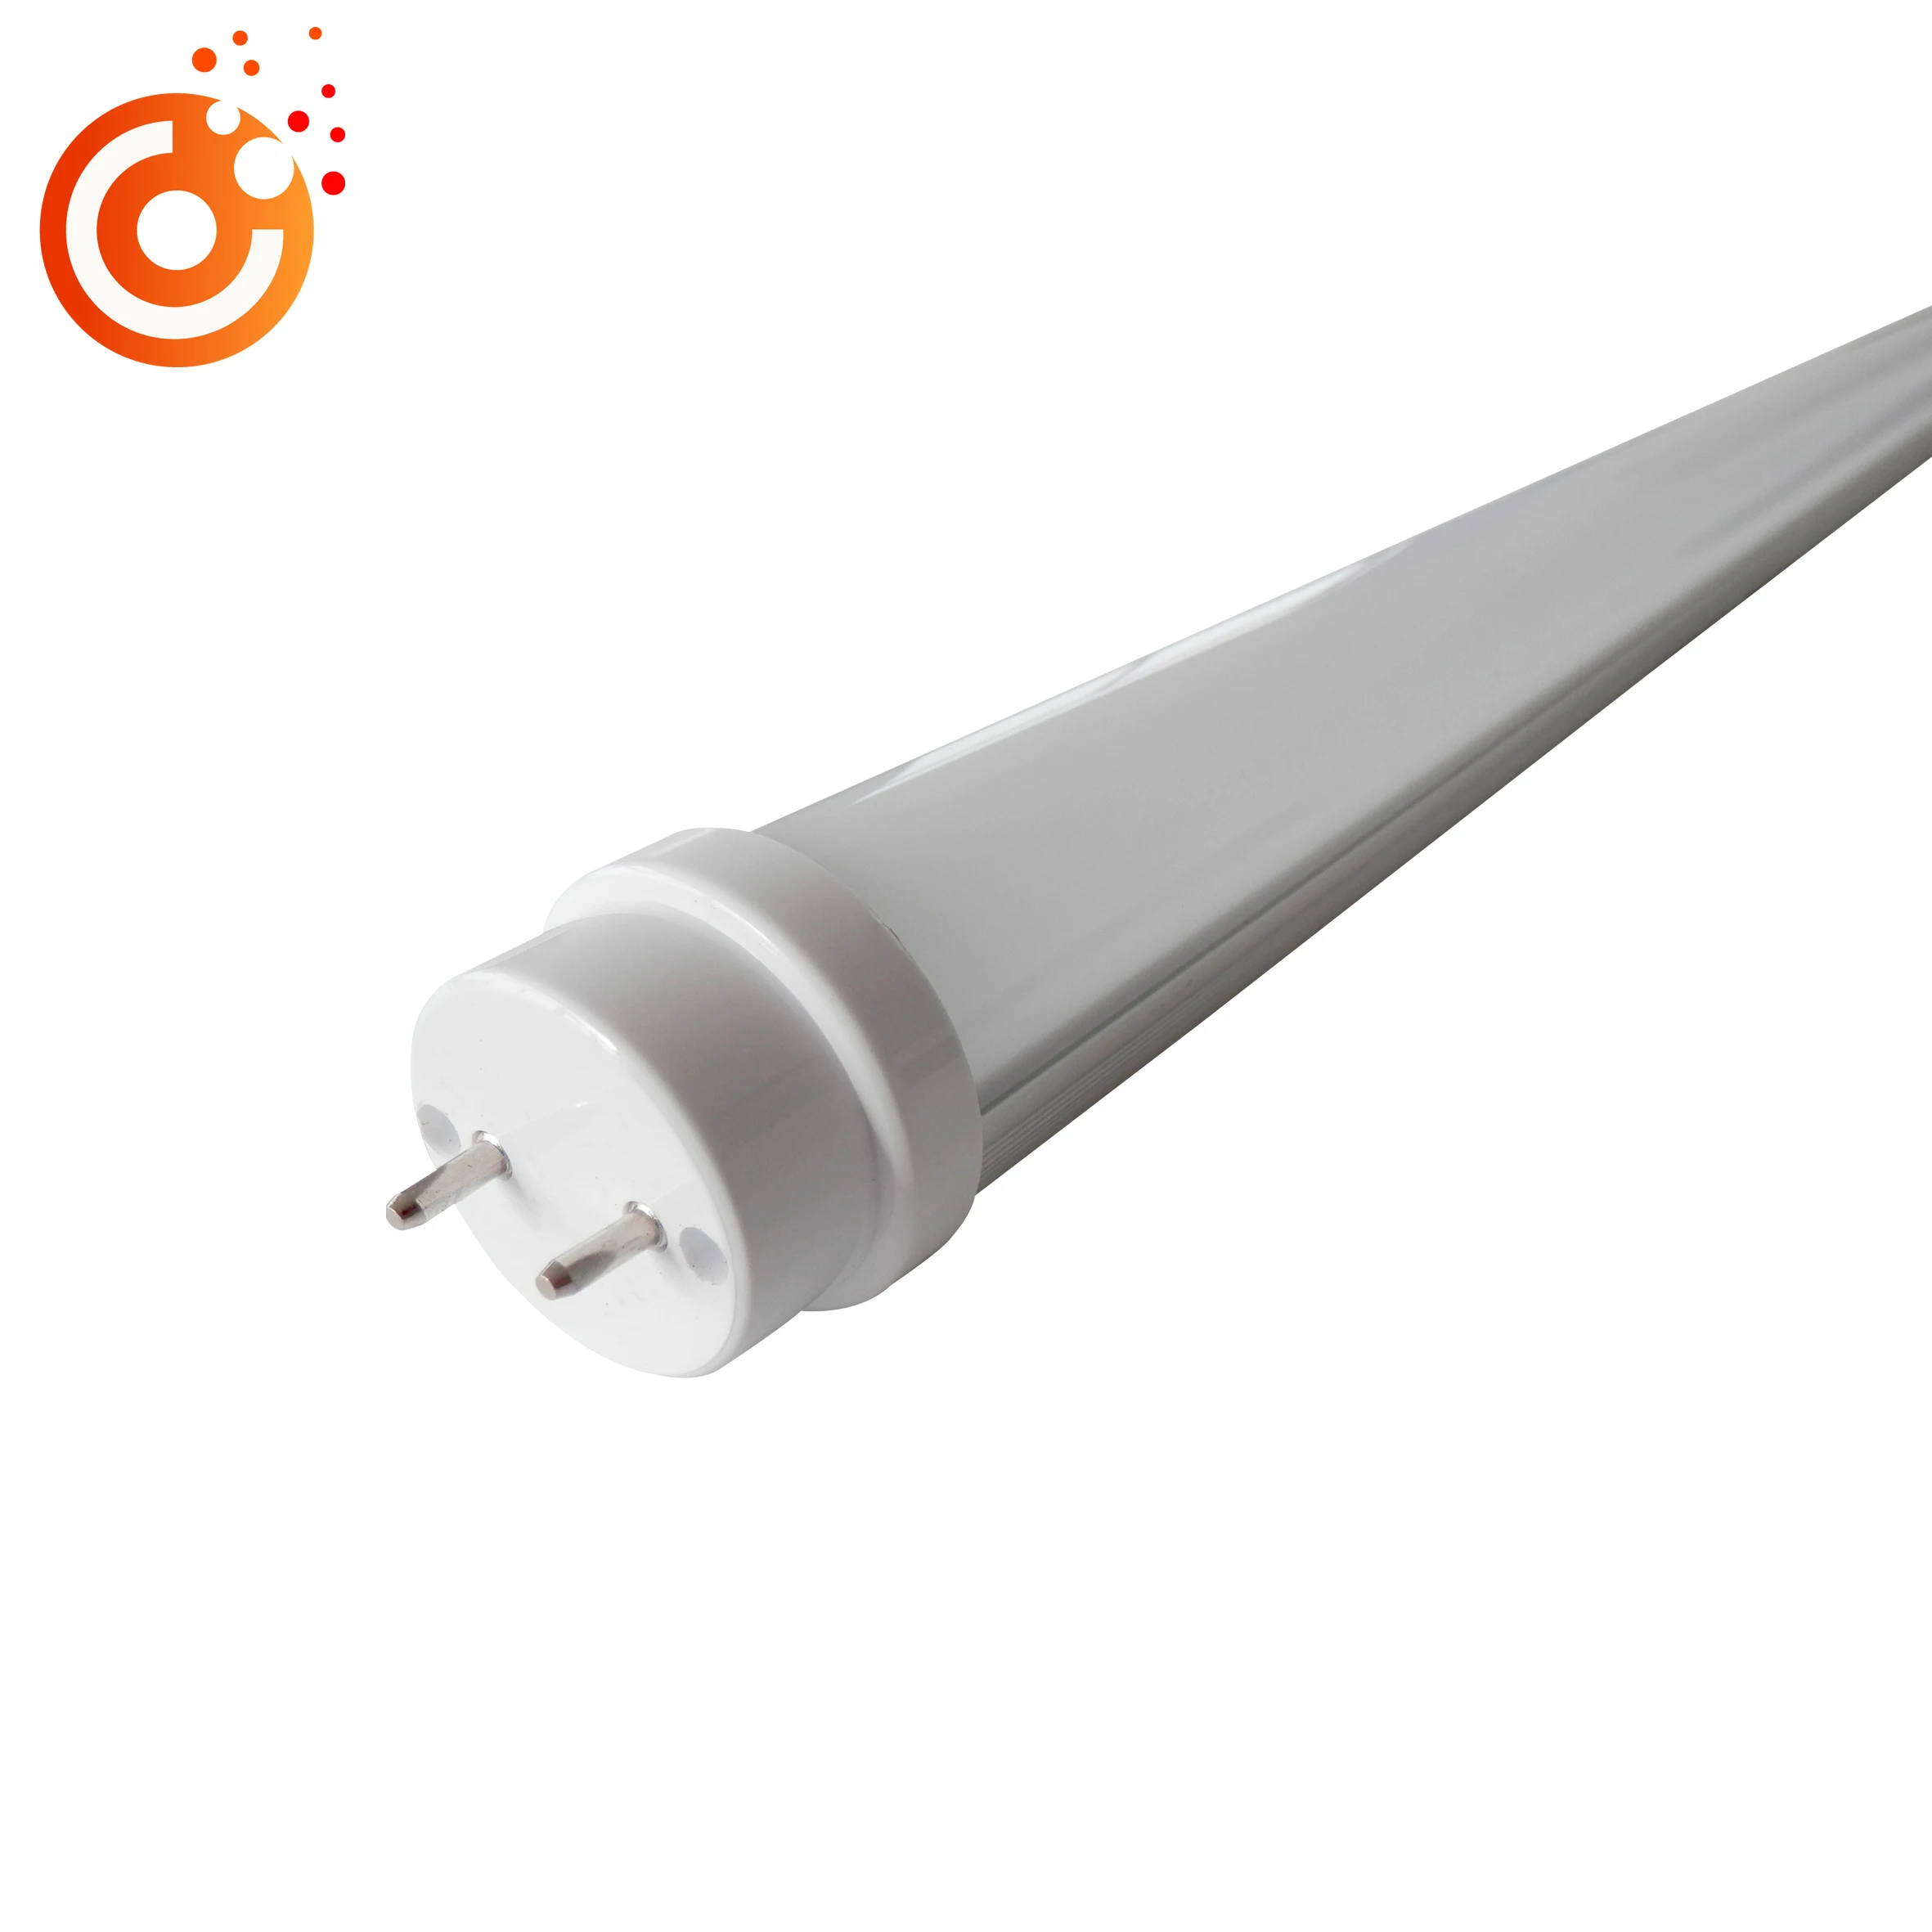 PSE No labor Compatible with electronic rectifier inductor rectifier Energy Saving Led Fluorescent Light T10 18 Watt Led Tube